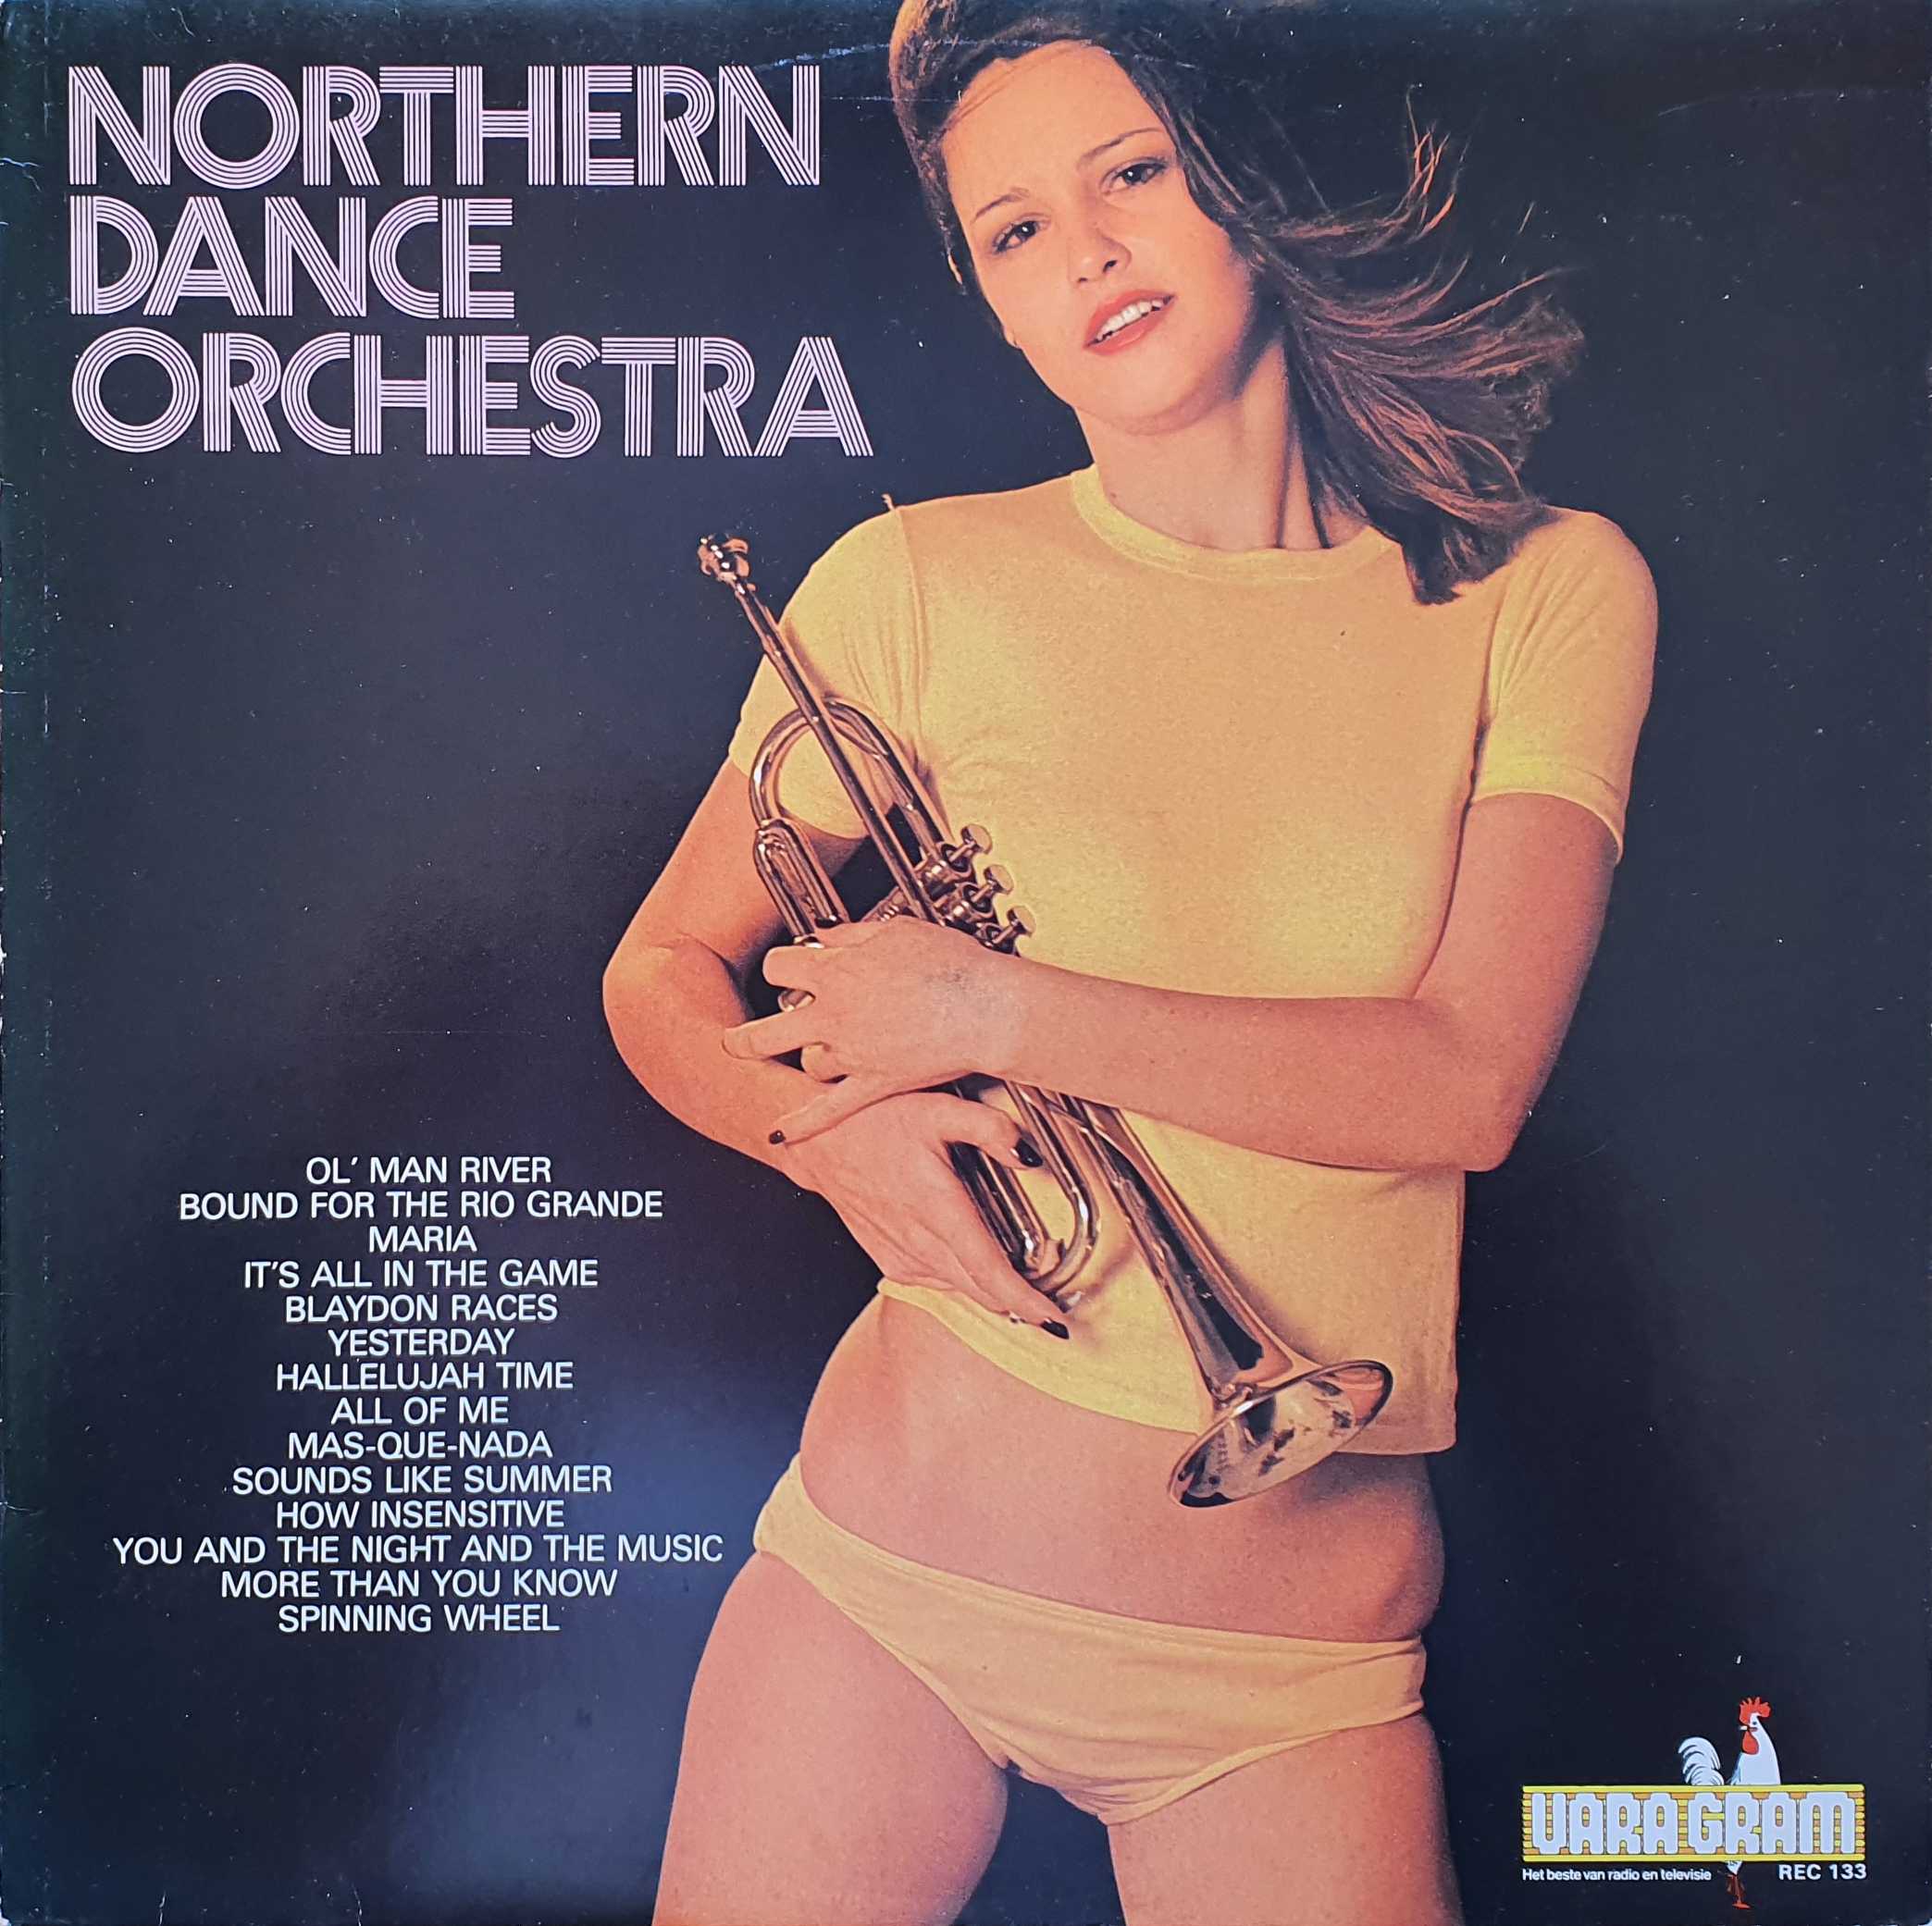 Picture of REC 133-iD Northern dance orchestra (Dutch import) by artist Various from the BBC albums - Records and Tapes library